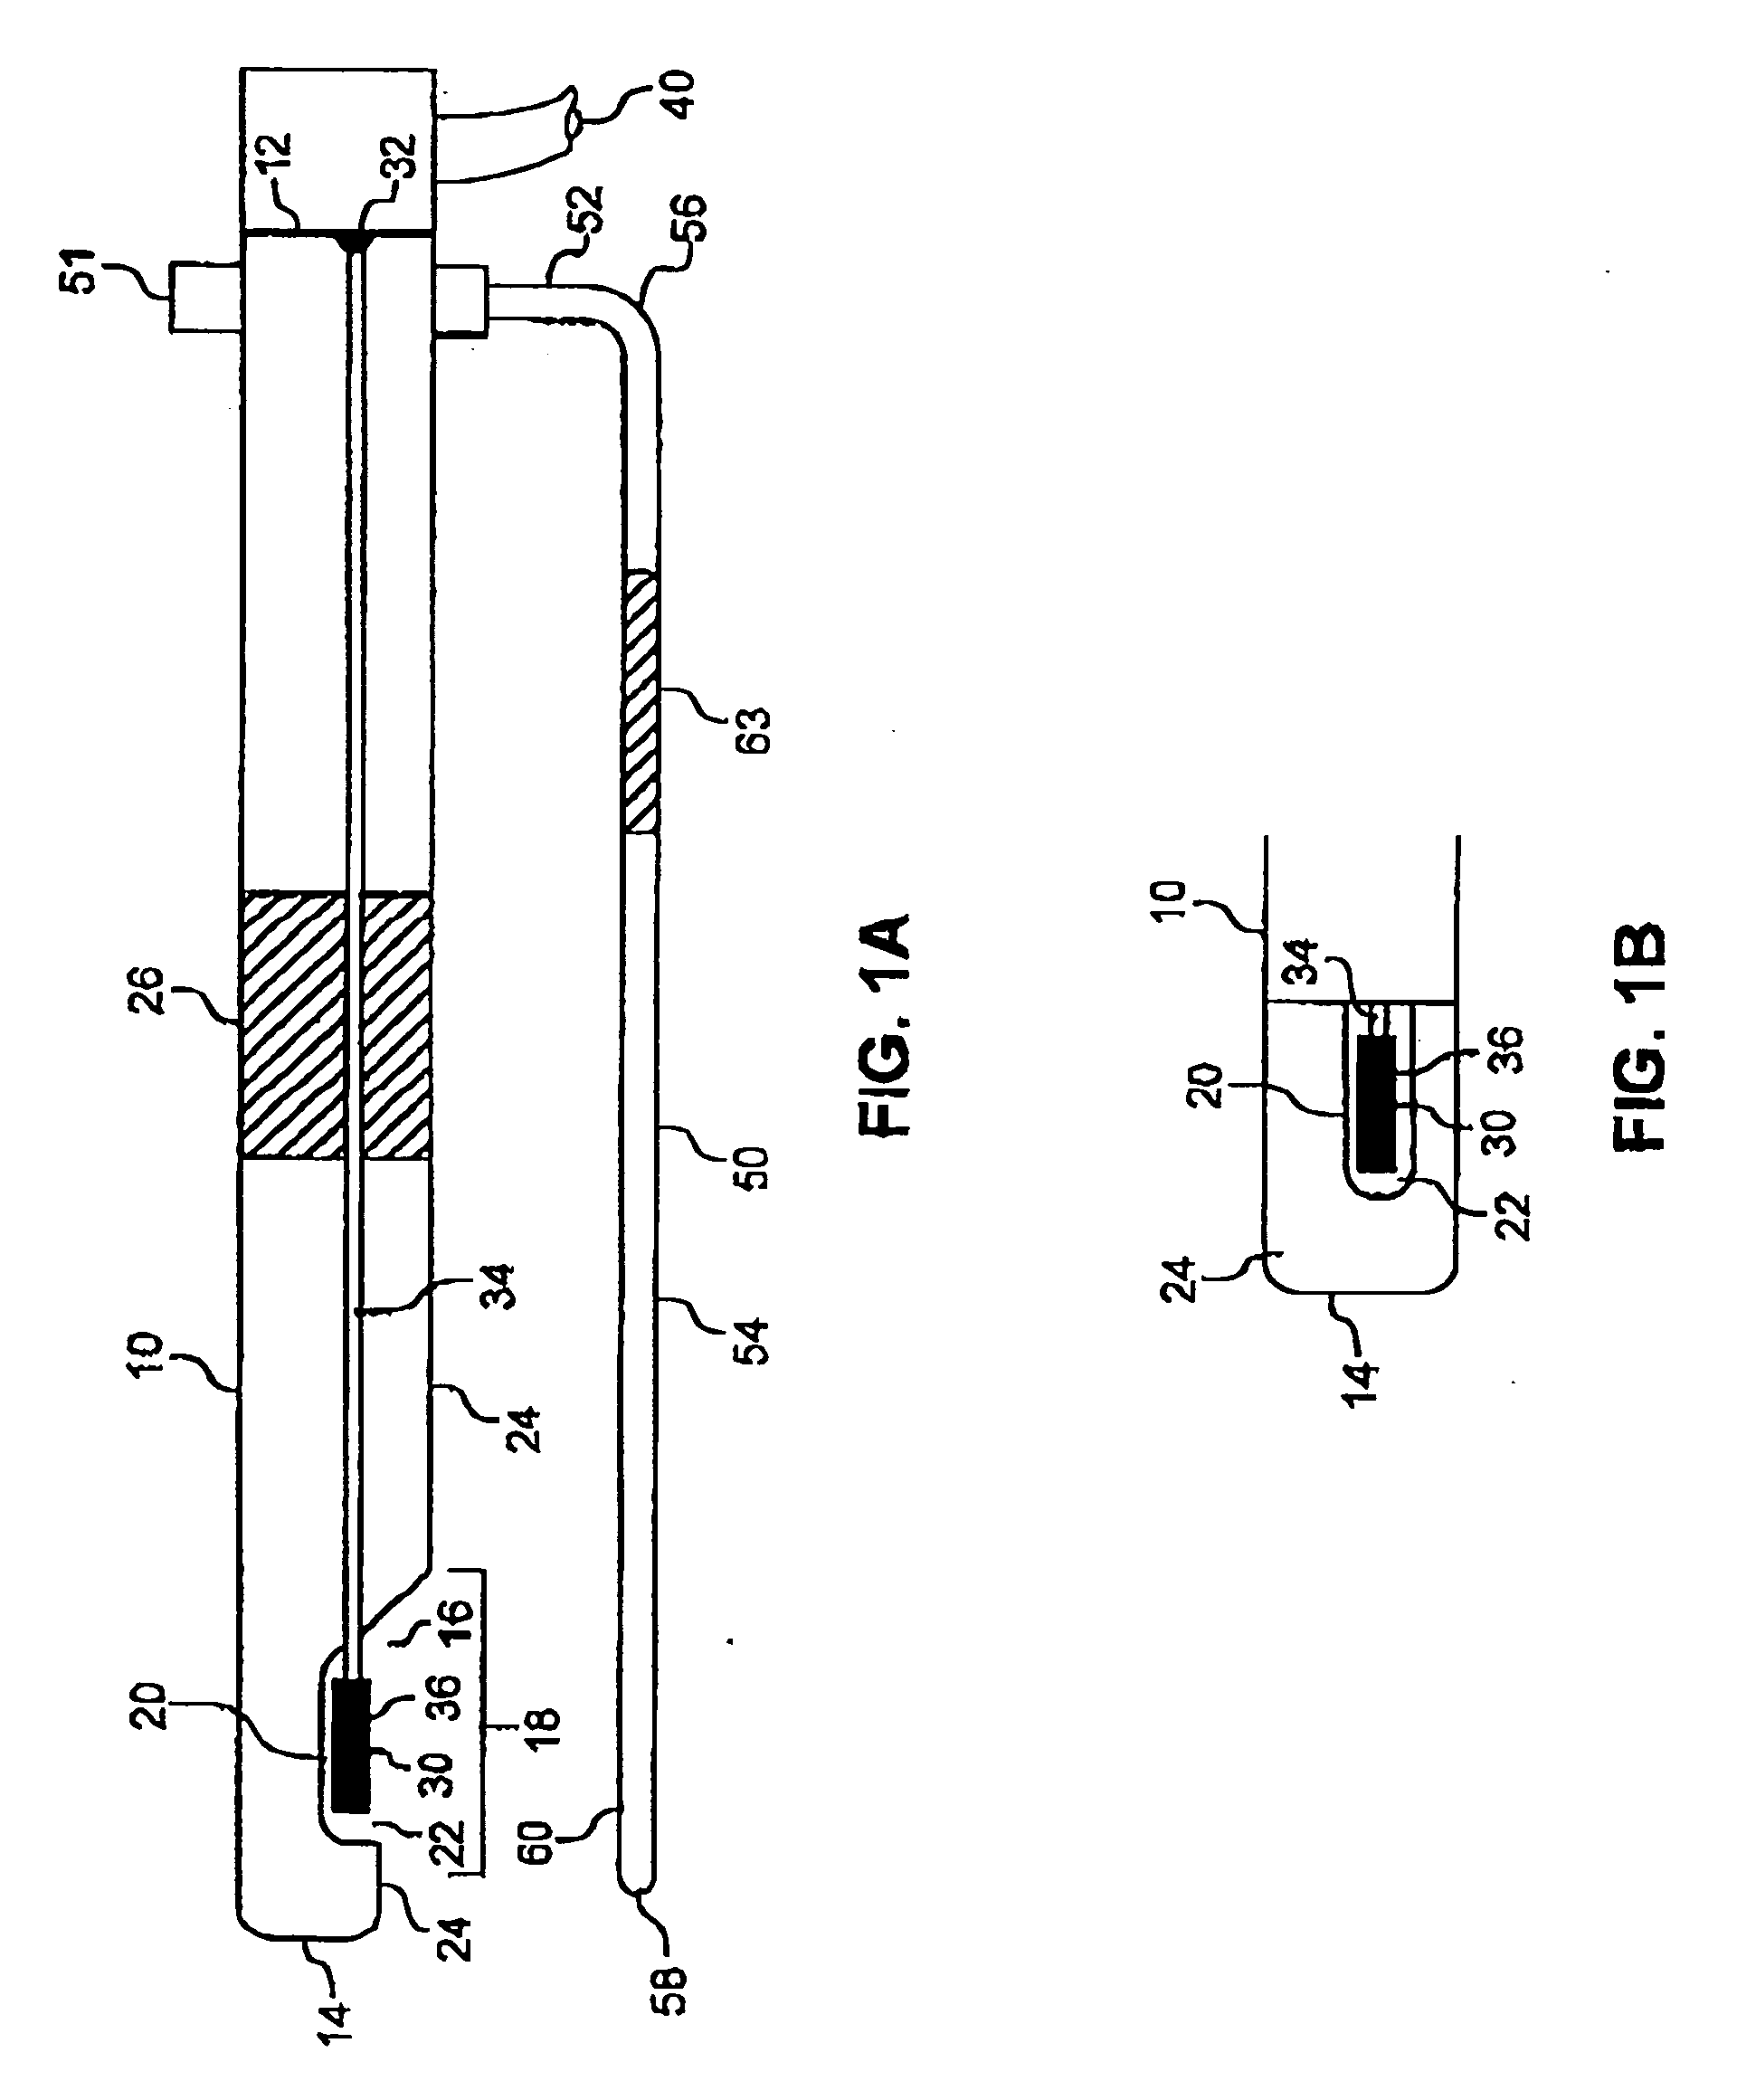 Noninvasive detection of a physiologic parameter with a probe